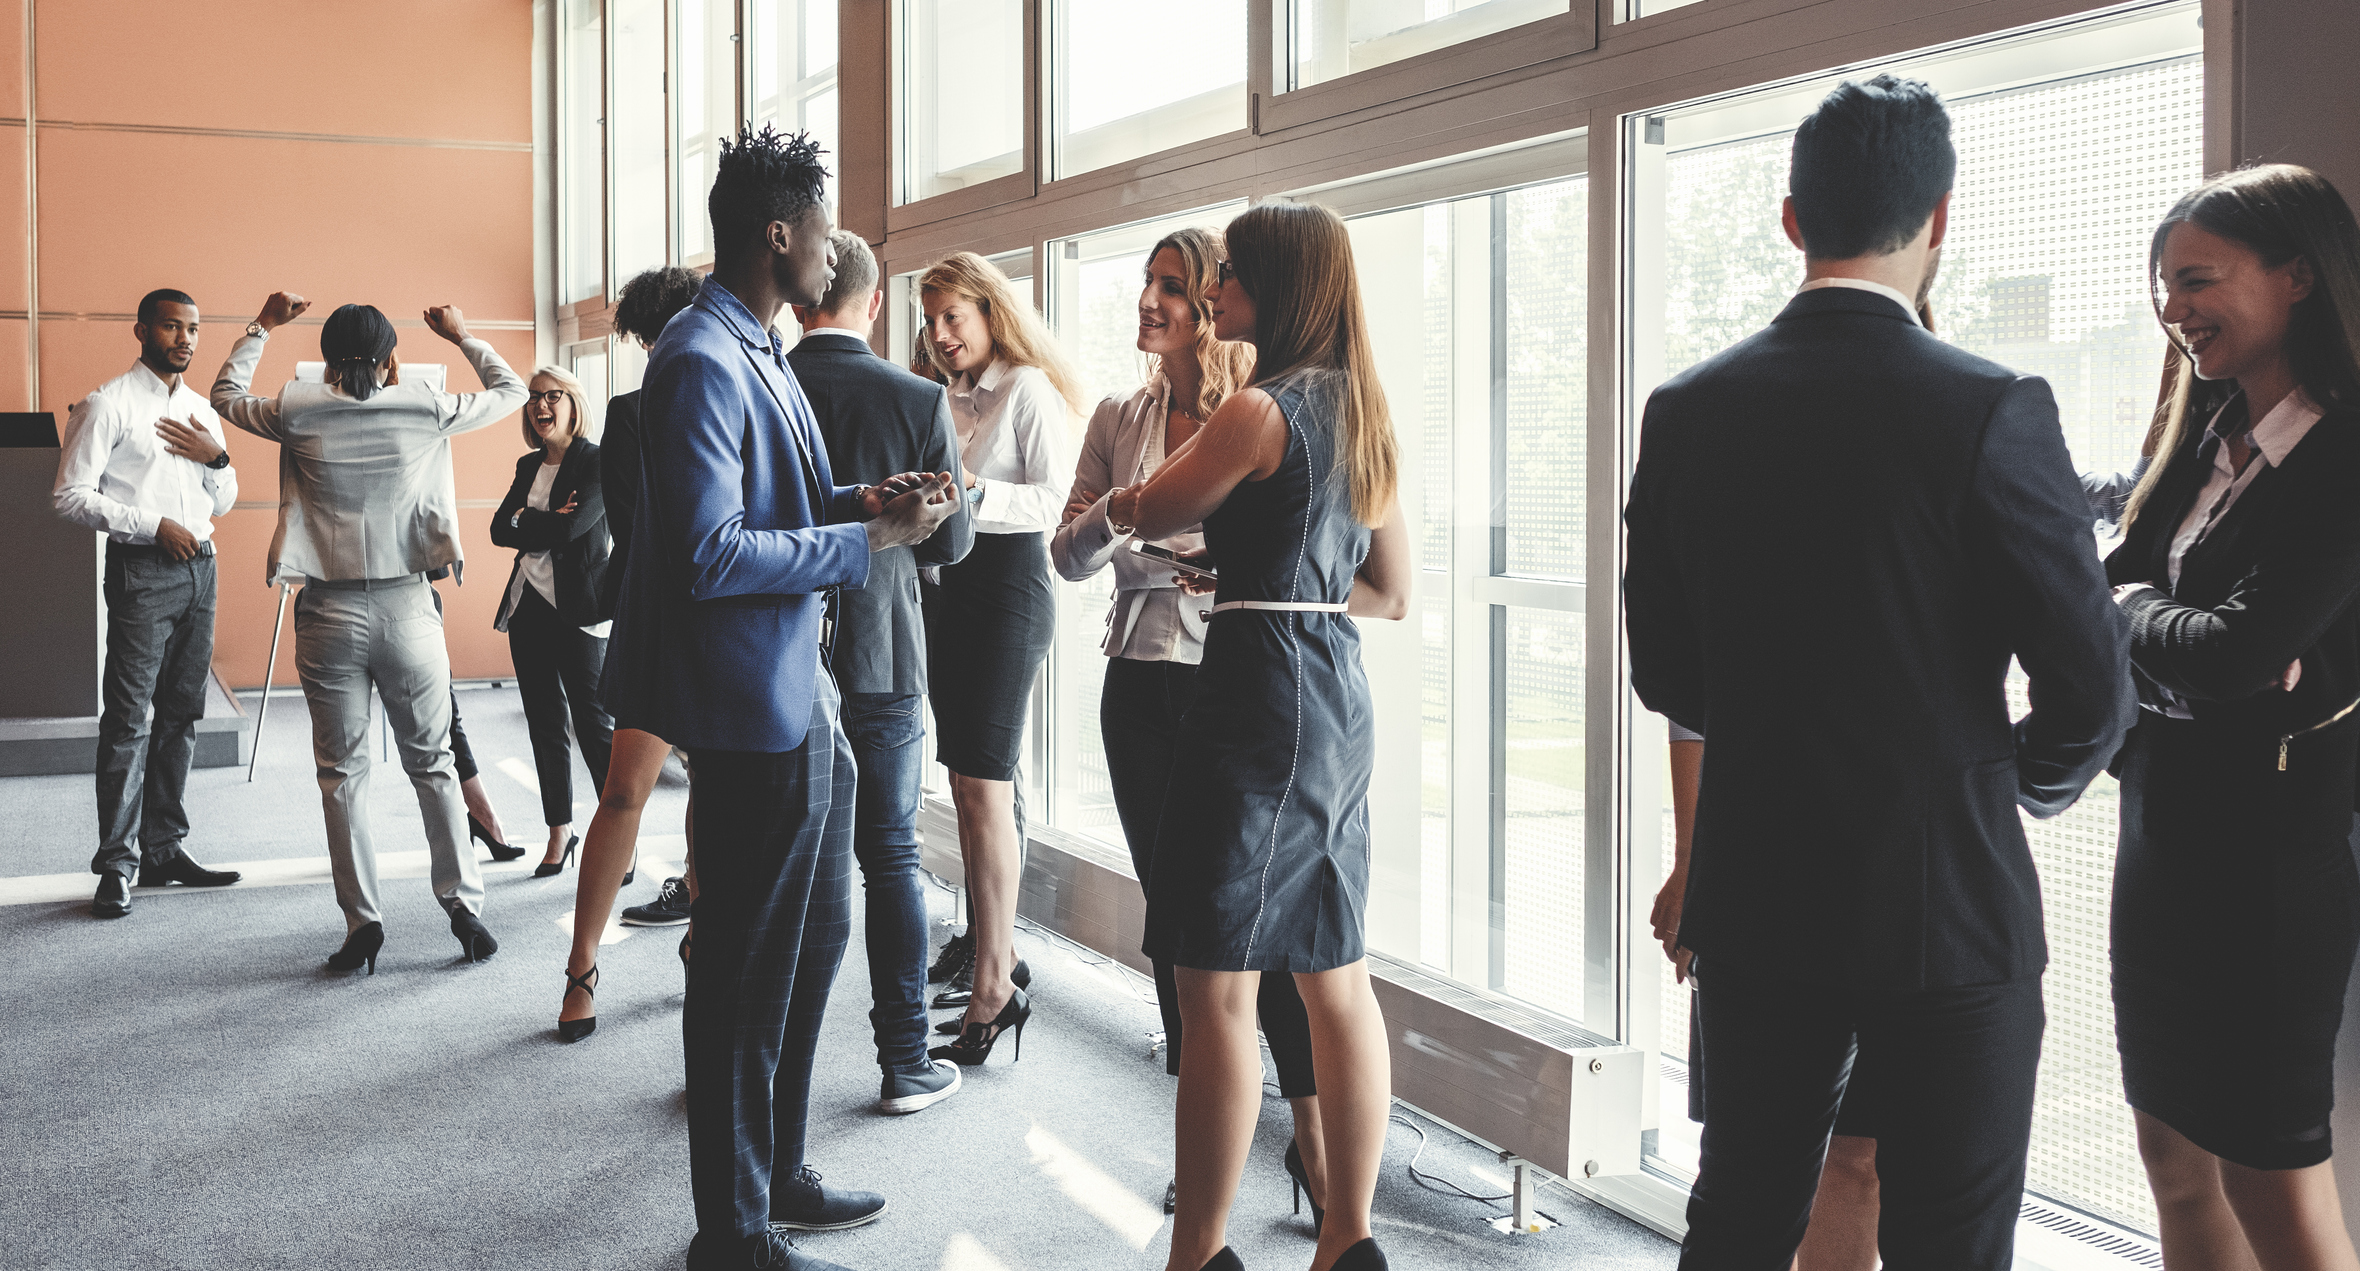 Networking Effectively, Part Two